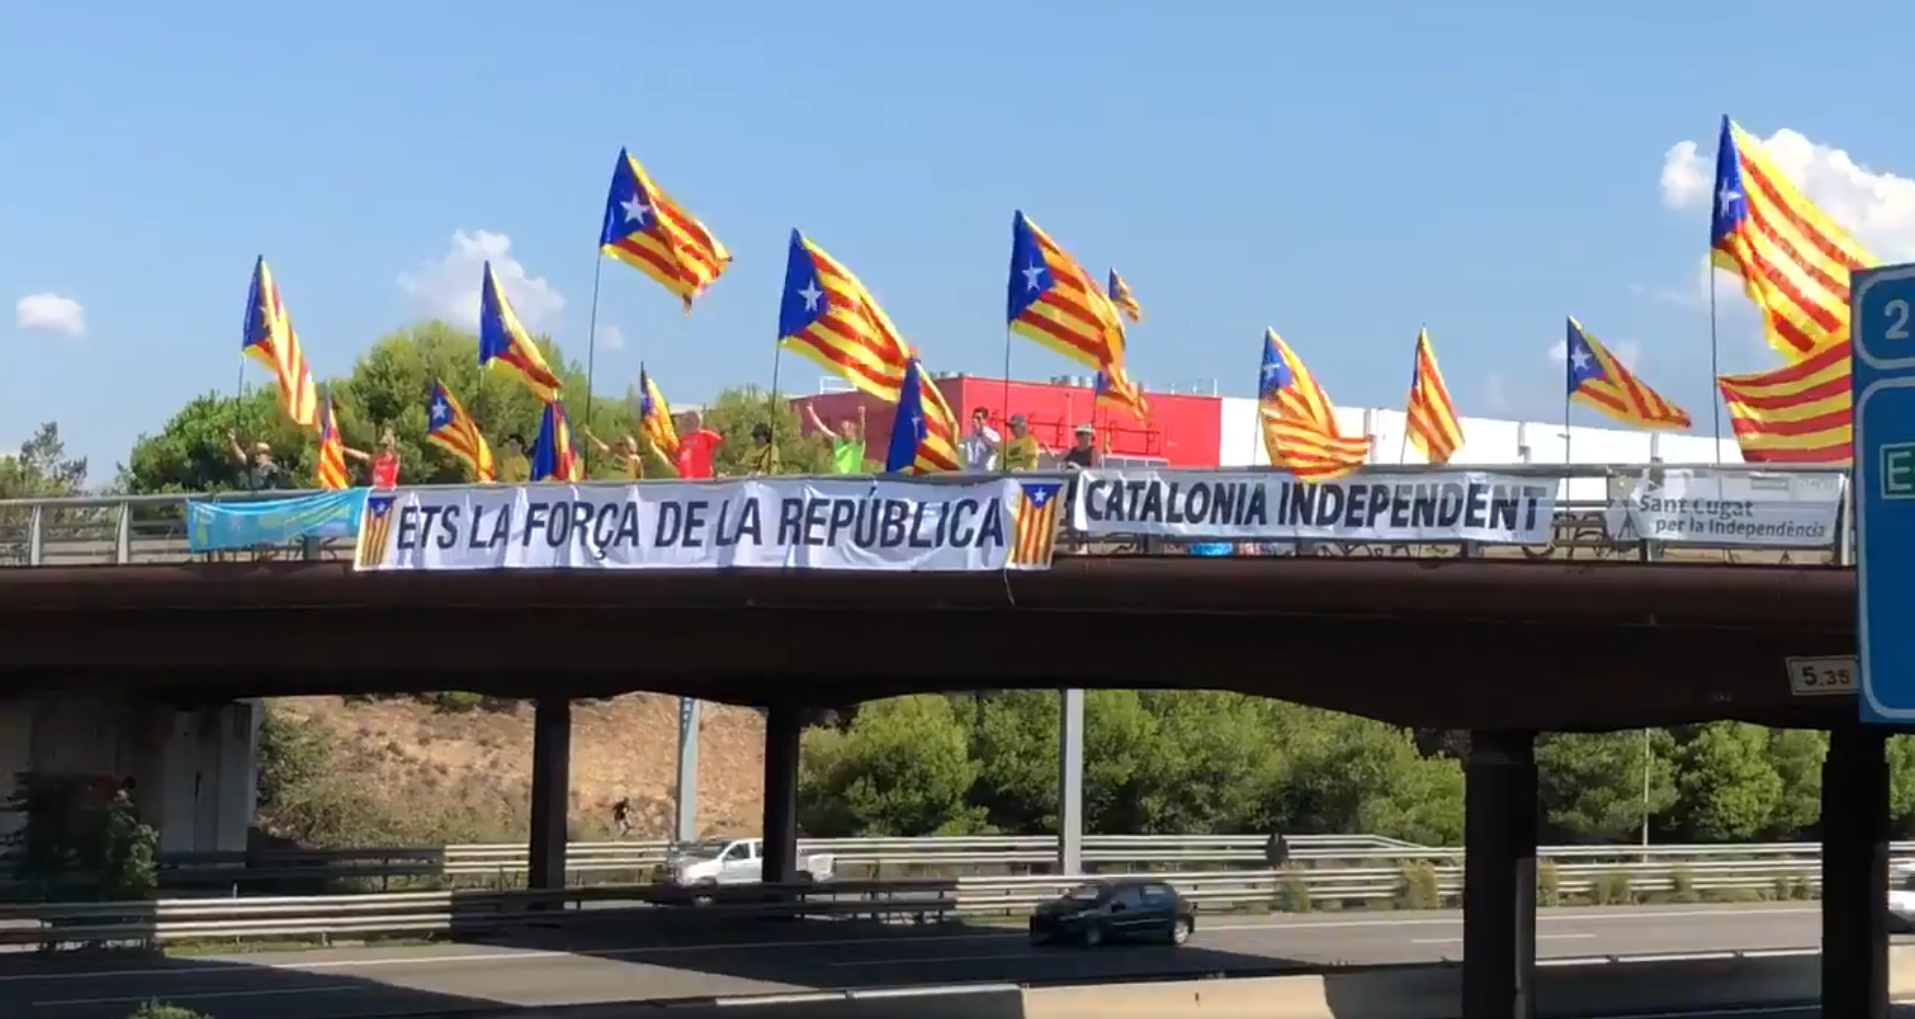 Catalan motorway bridges turn red, yellow and blue in independence protest